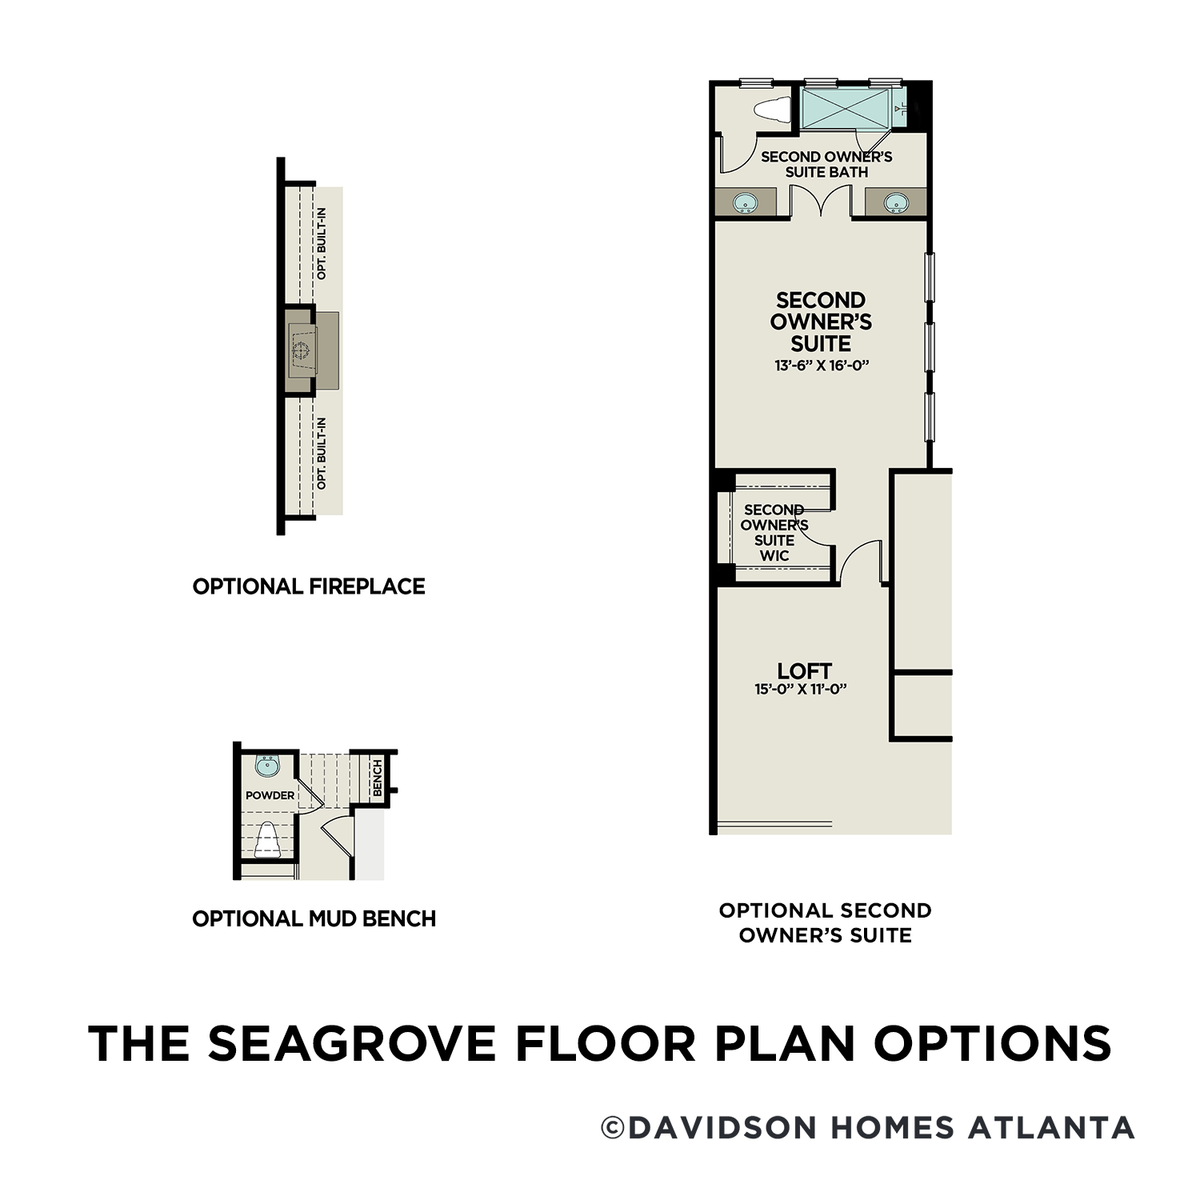 3 - The Seagrove B floor plan layout for 748 Stickley Oak Way in Davidson Homes' The Village at Towne Lake community.